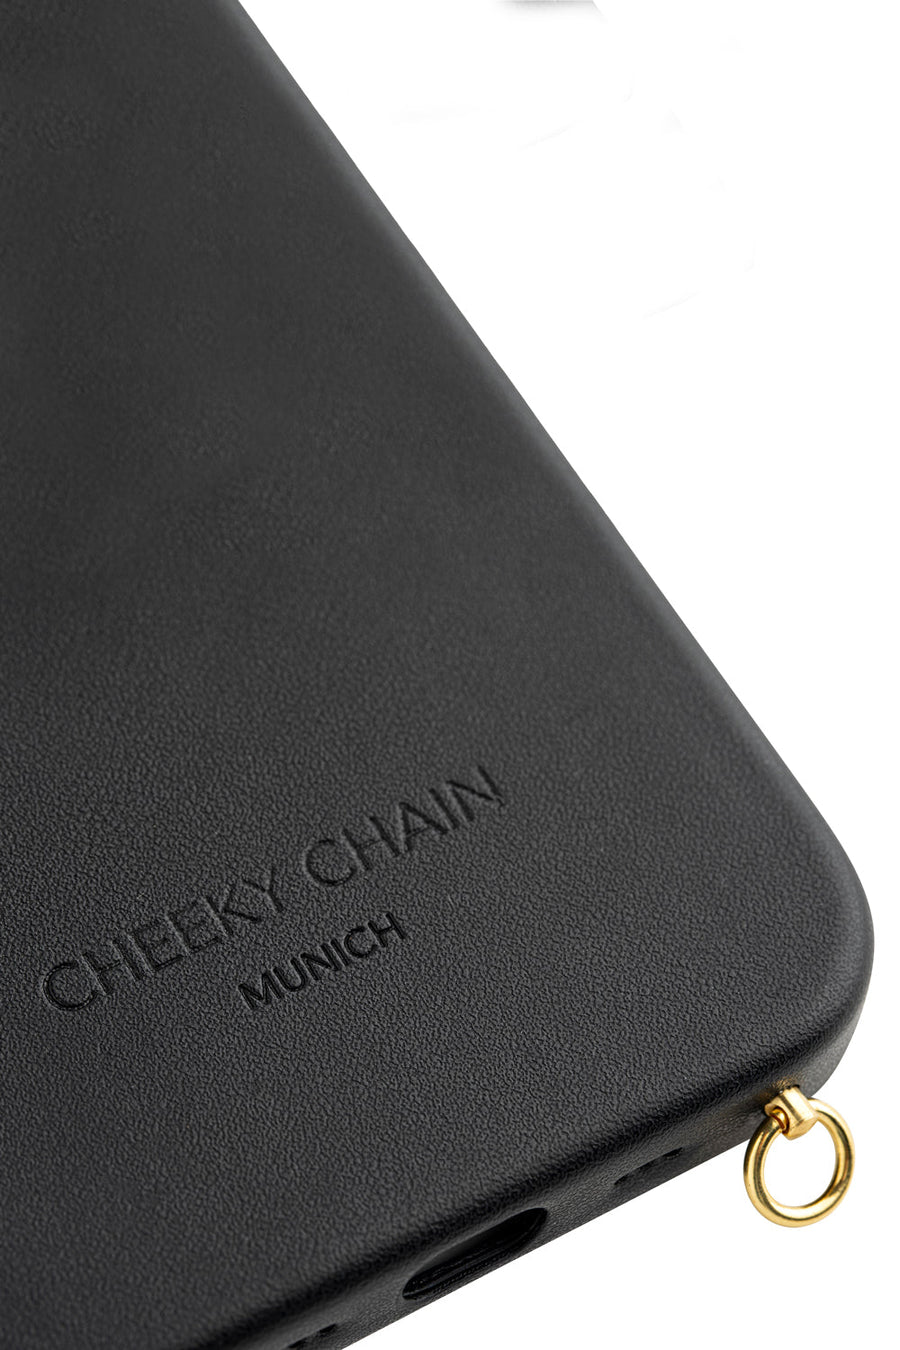 Mobile phone case Black Vegan Leather with embossing